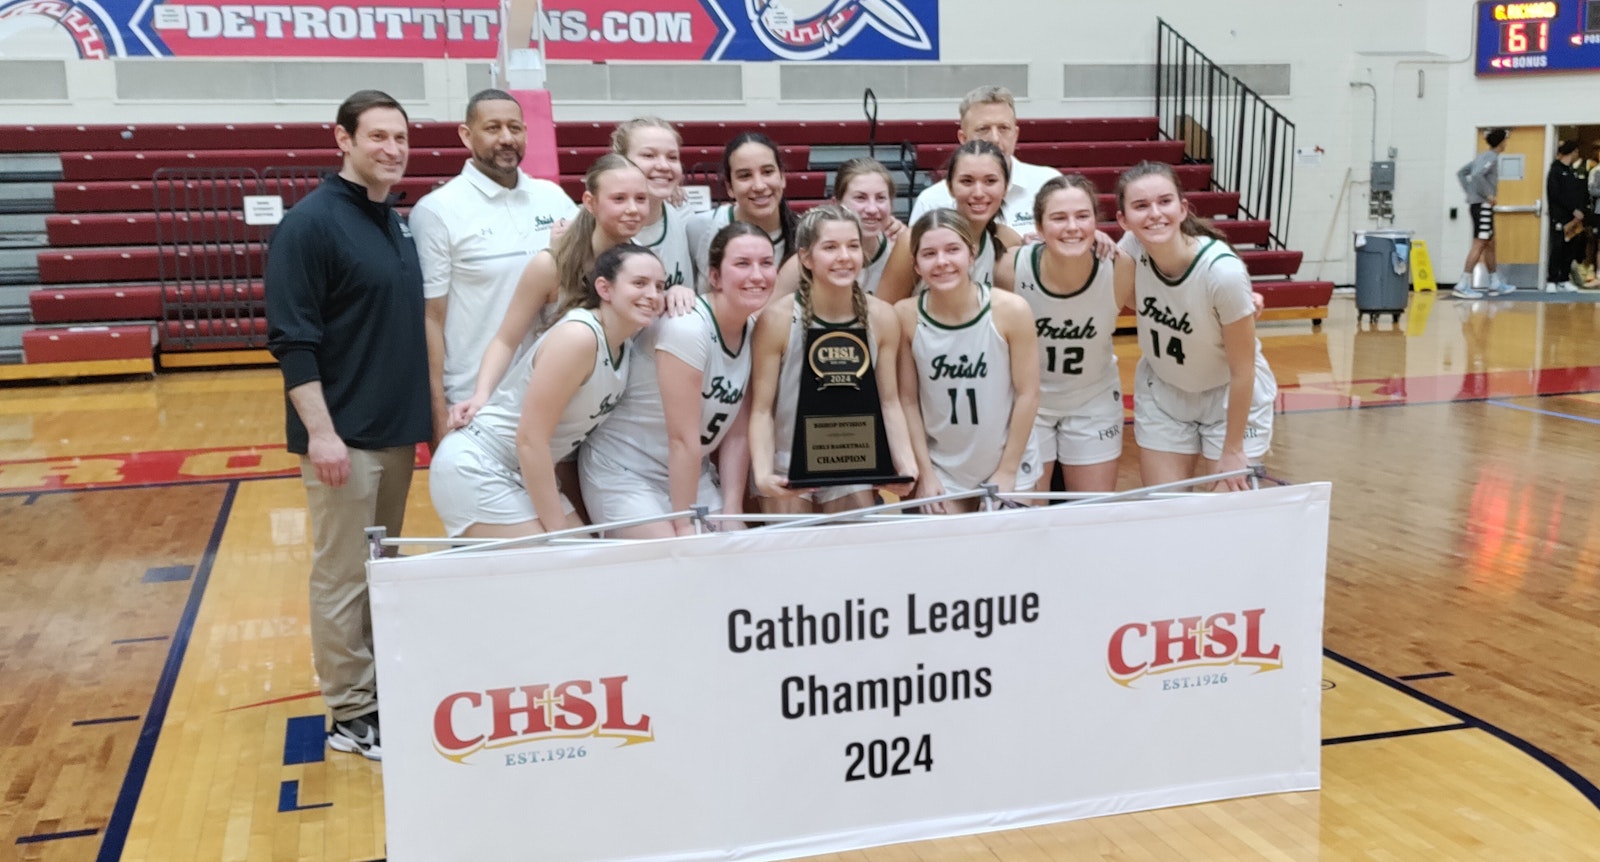 Fr. Gabriel Richard successfully defended its girls Bishop Division championship by beating Toledo Central Catholic, 61-47.